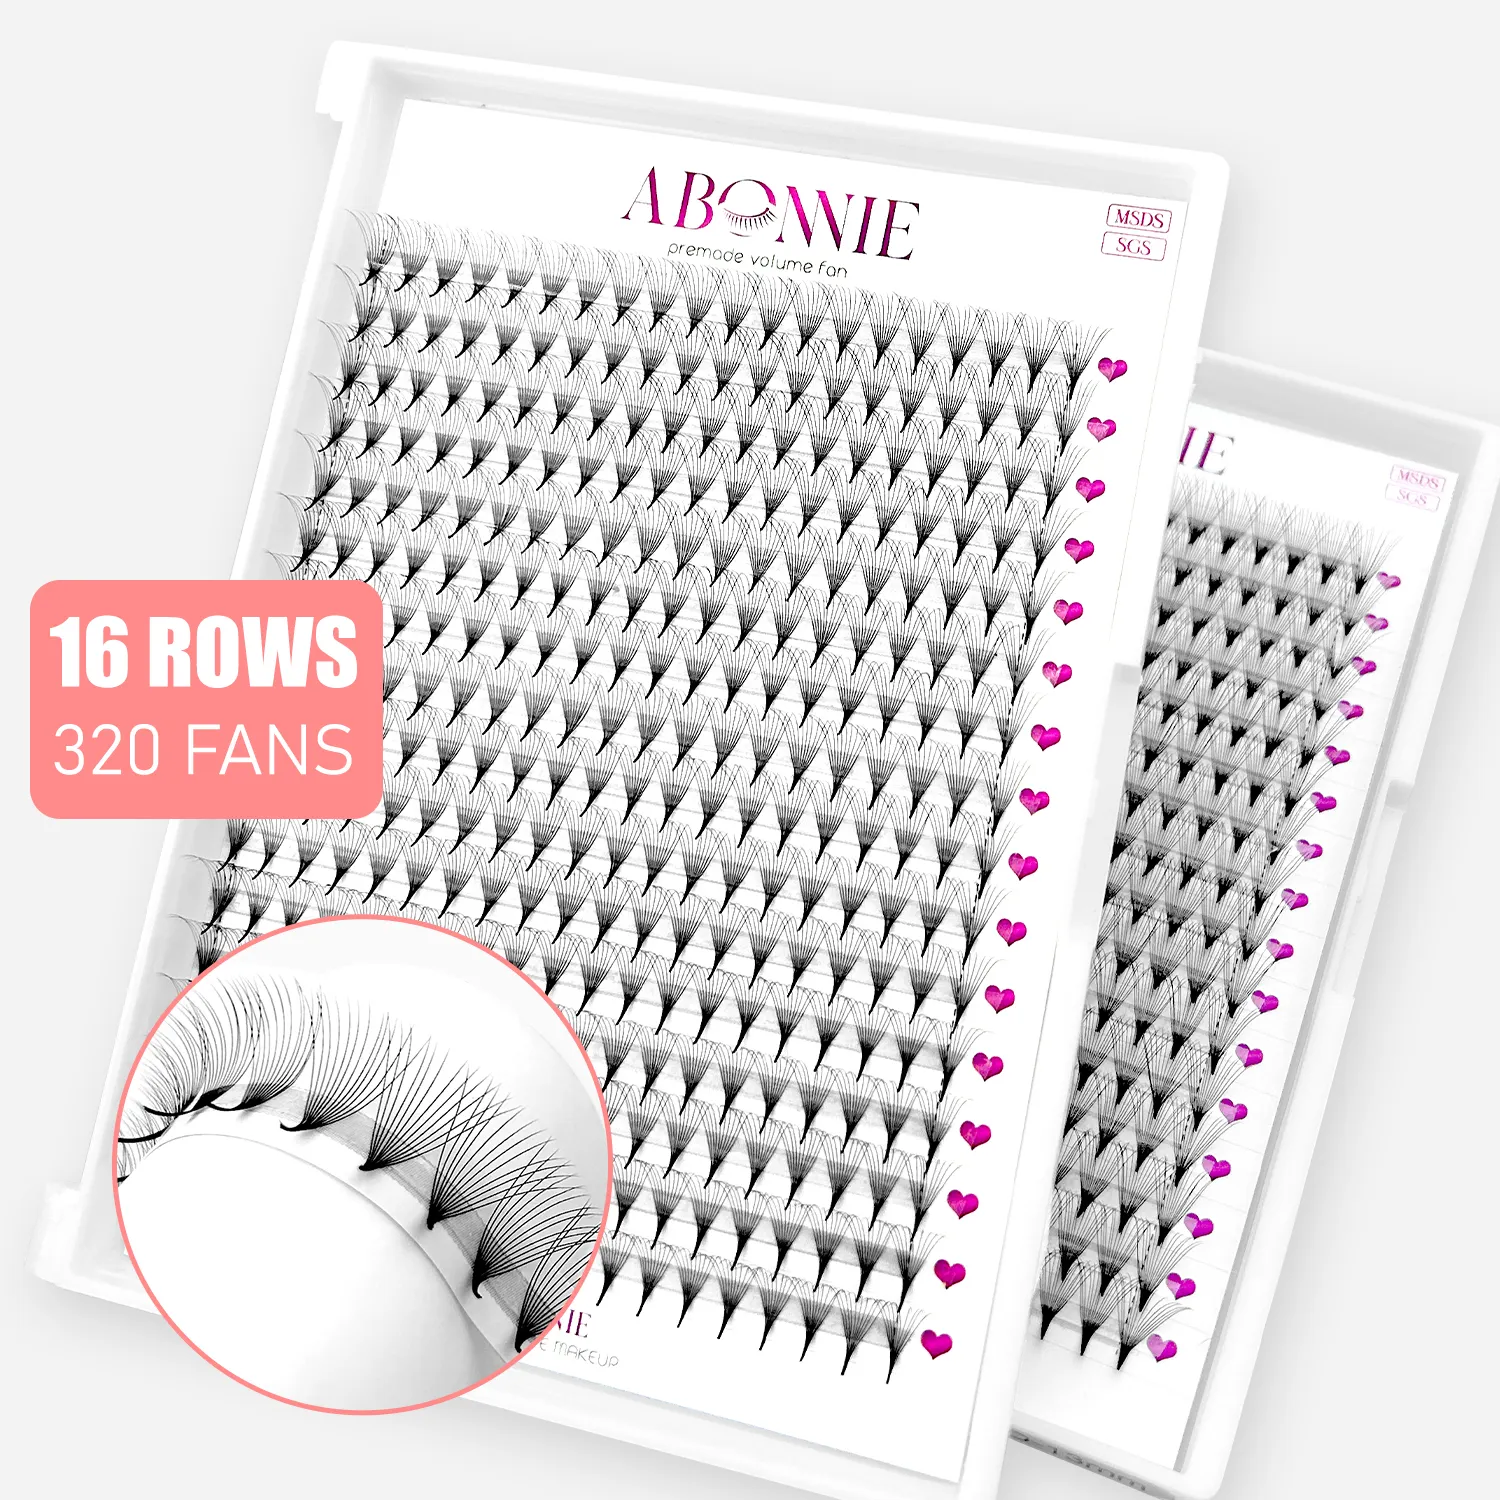 Abonnie Large Trays Premade Lash Fans Private Label Eyelash Premade Bouquets Promade Lashes 3D